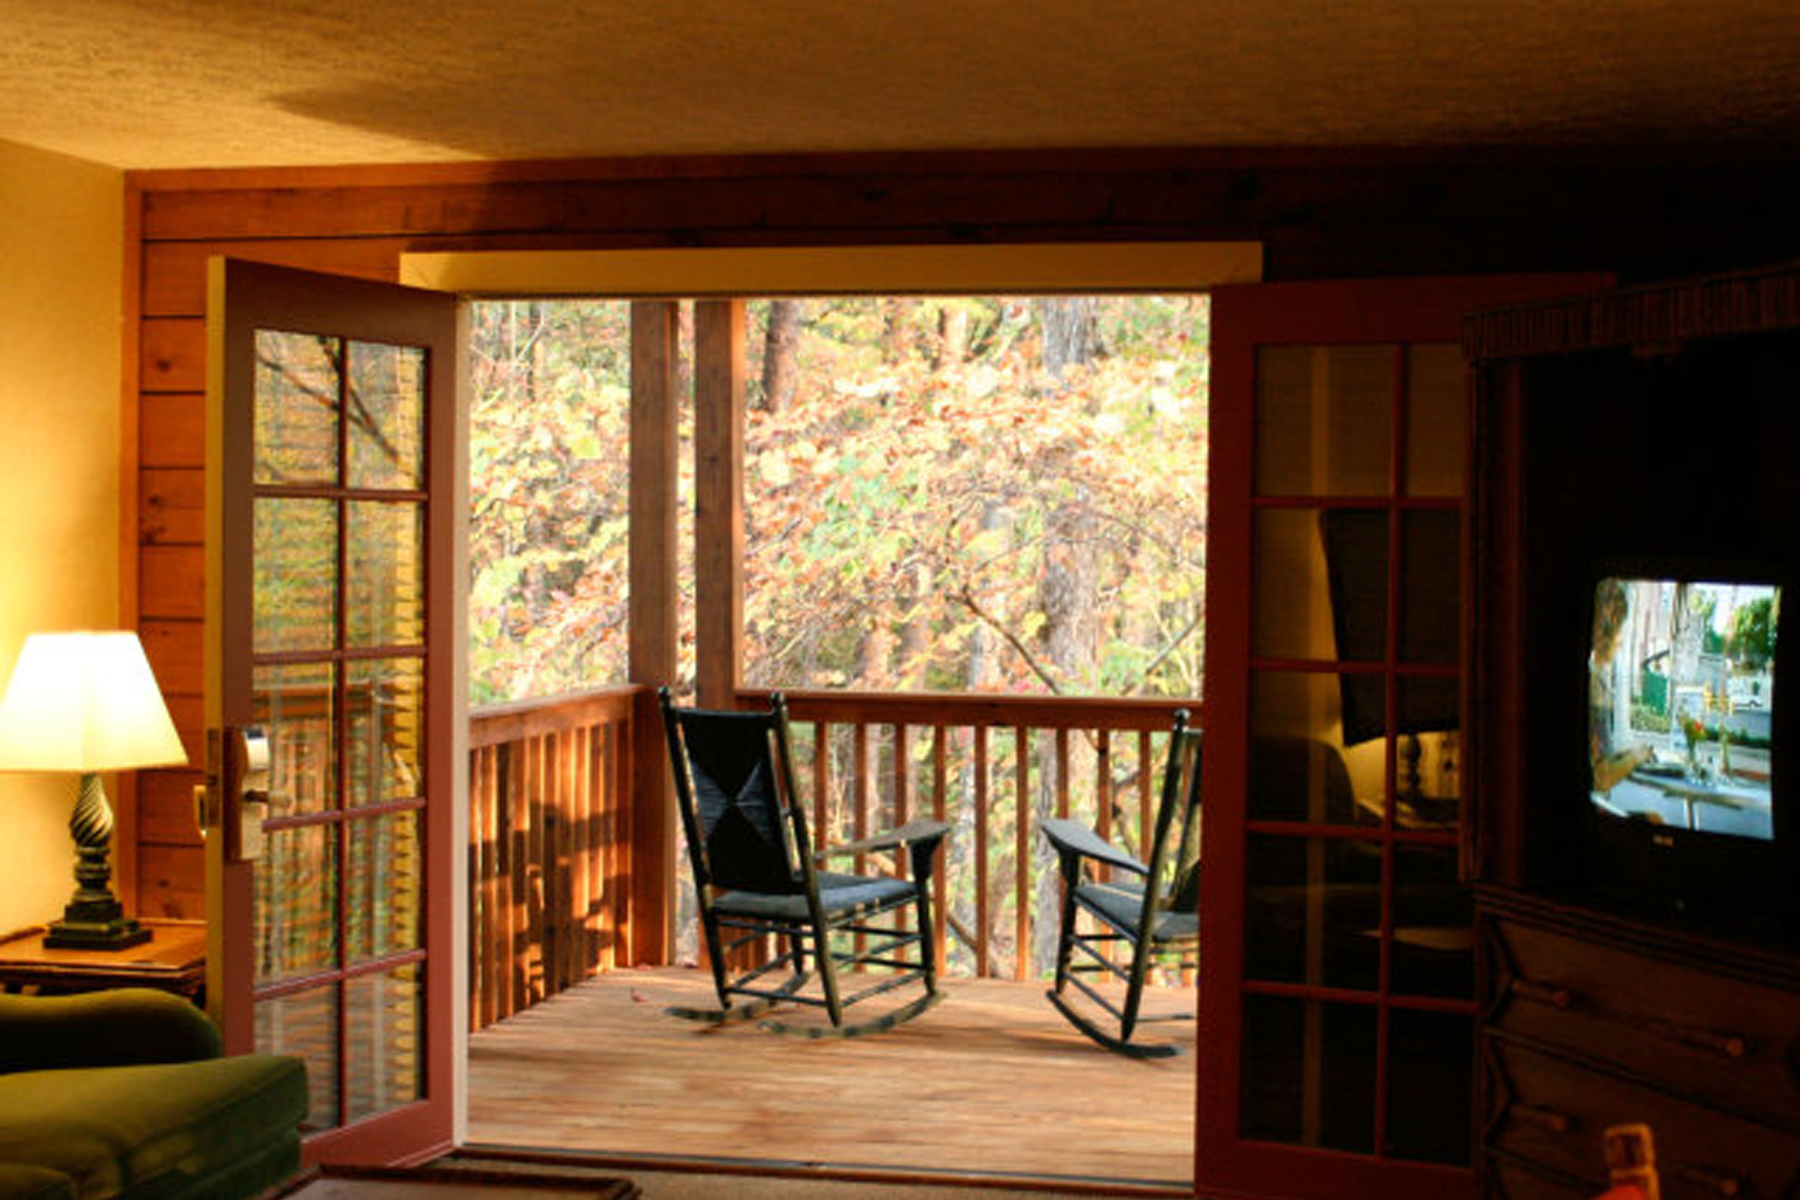 BVR Promotion Cozy cabin in the north georgia woods